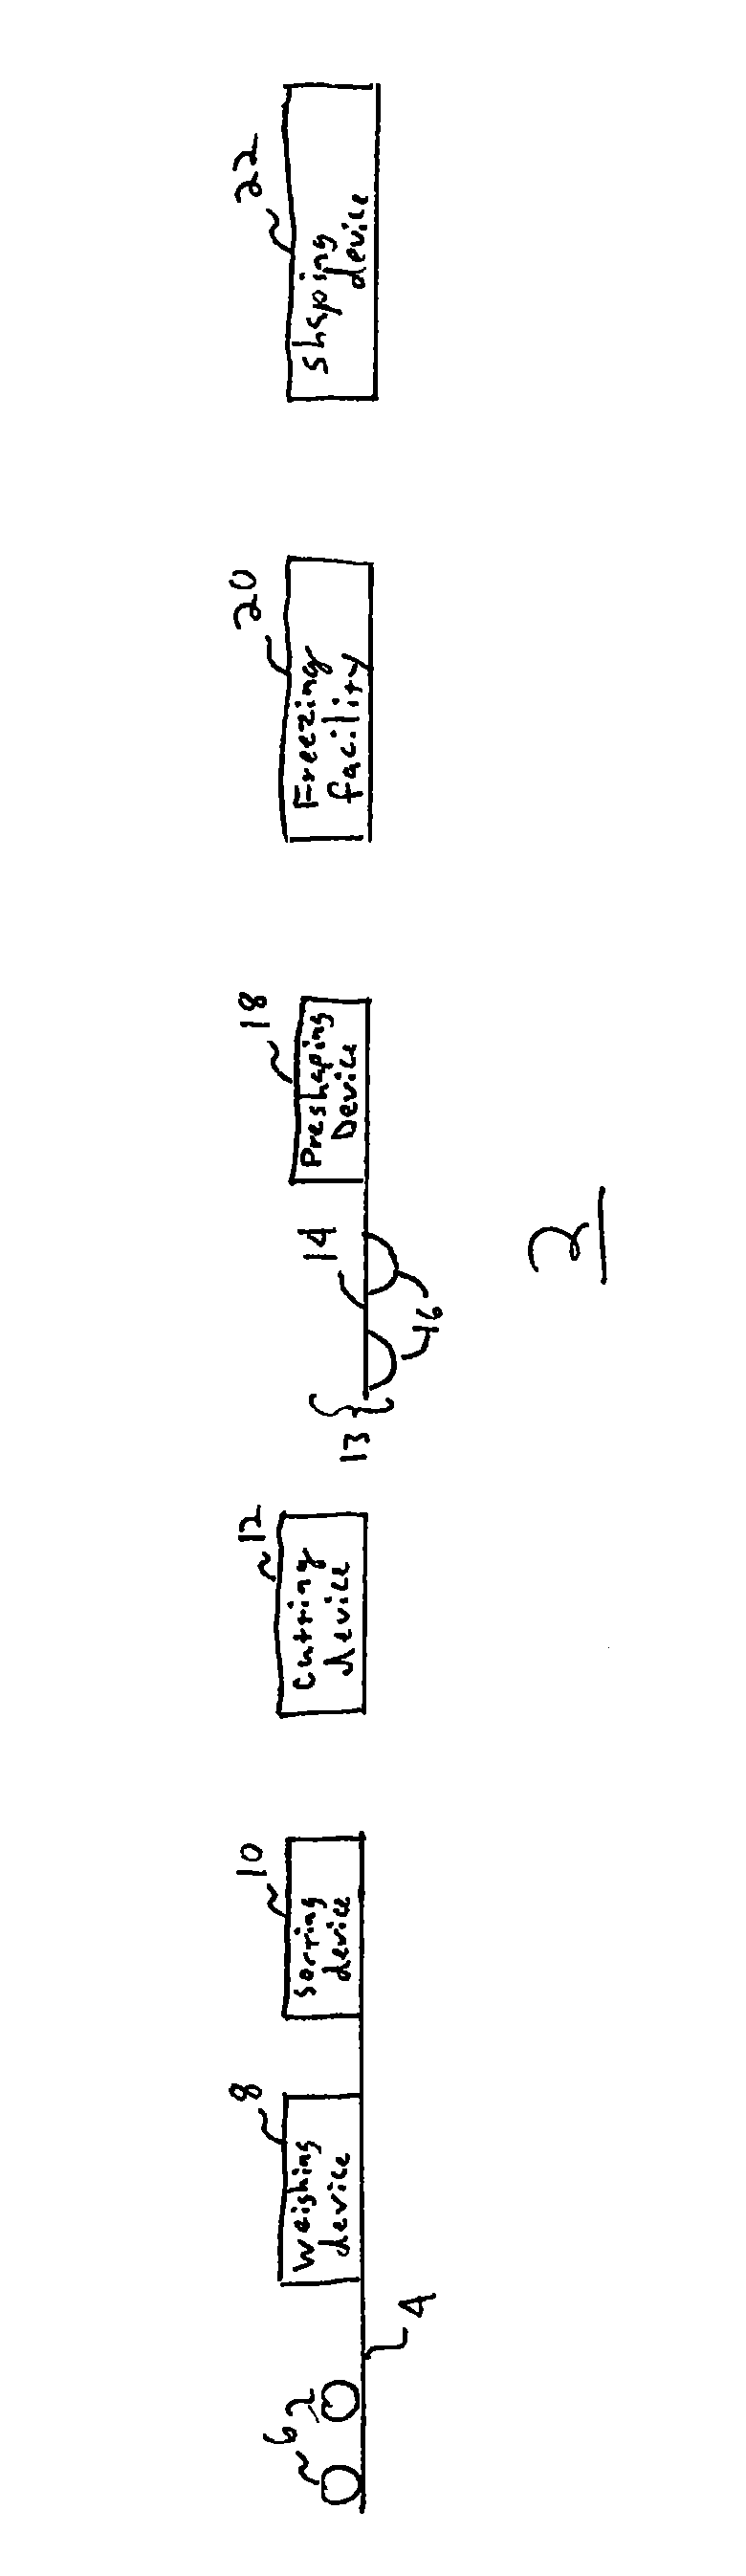 Method and device for producing shaped meat portions from whole natural meat pieces